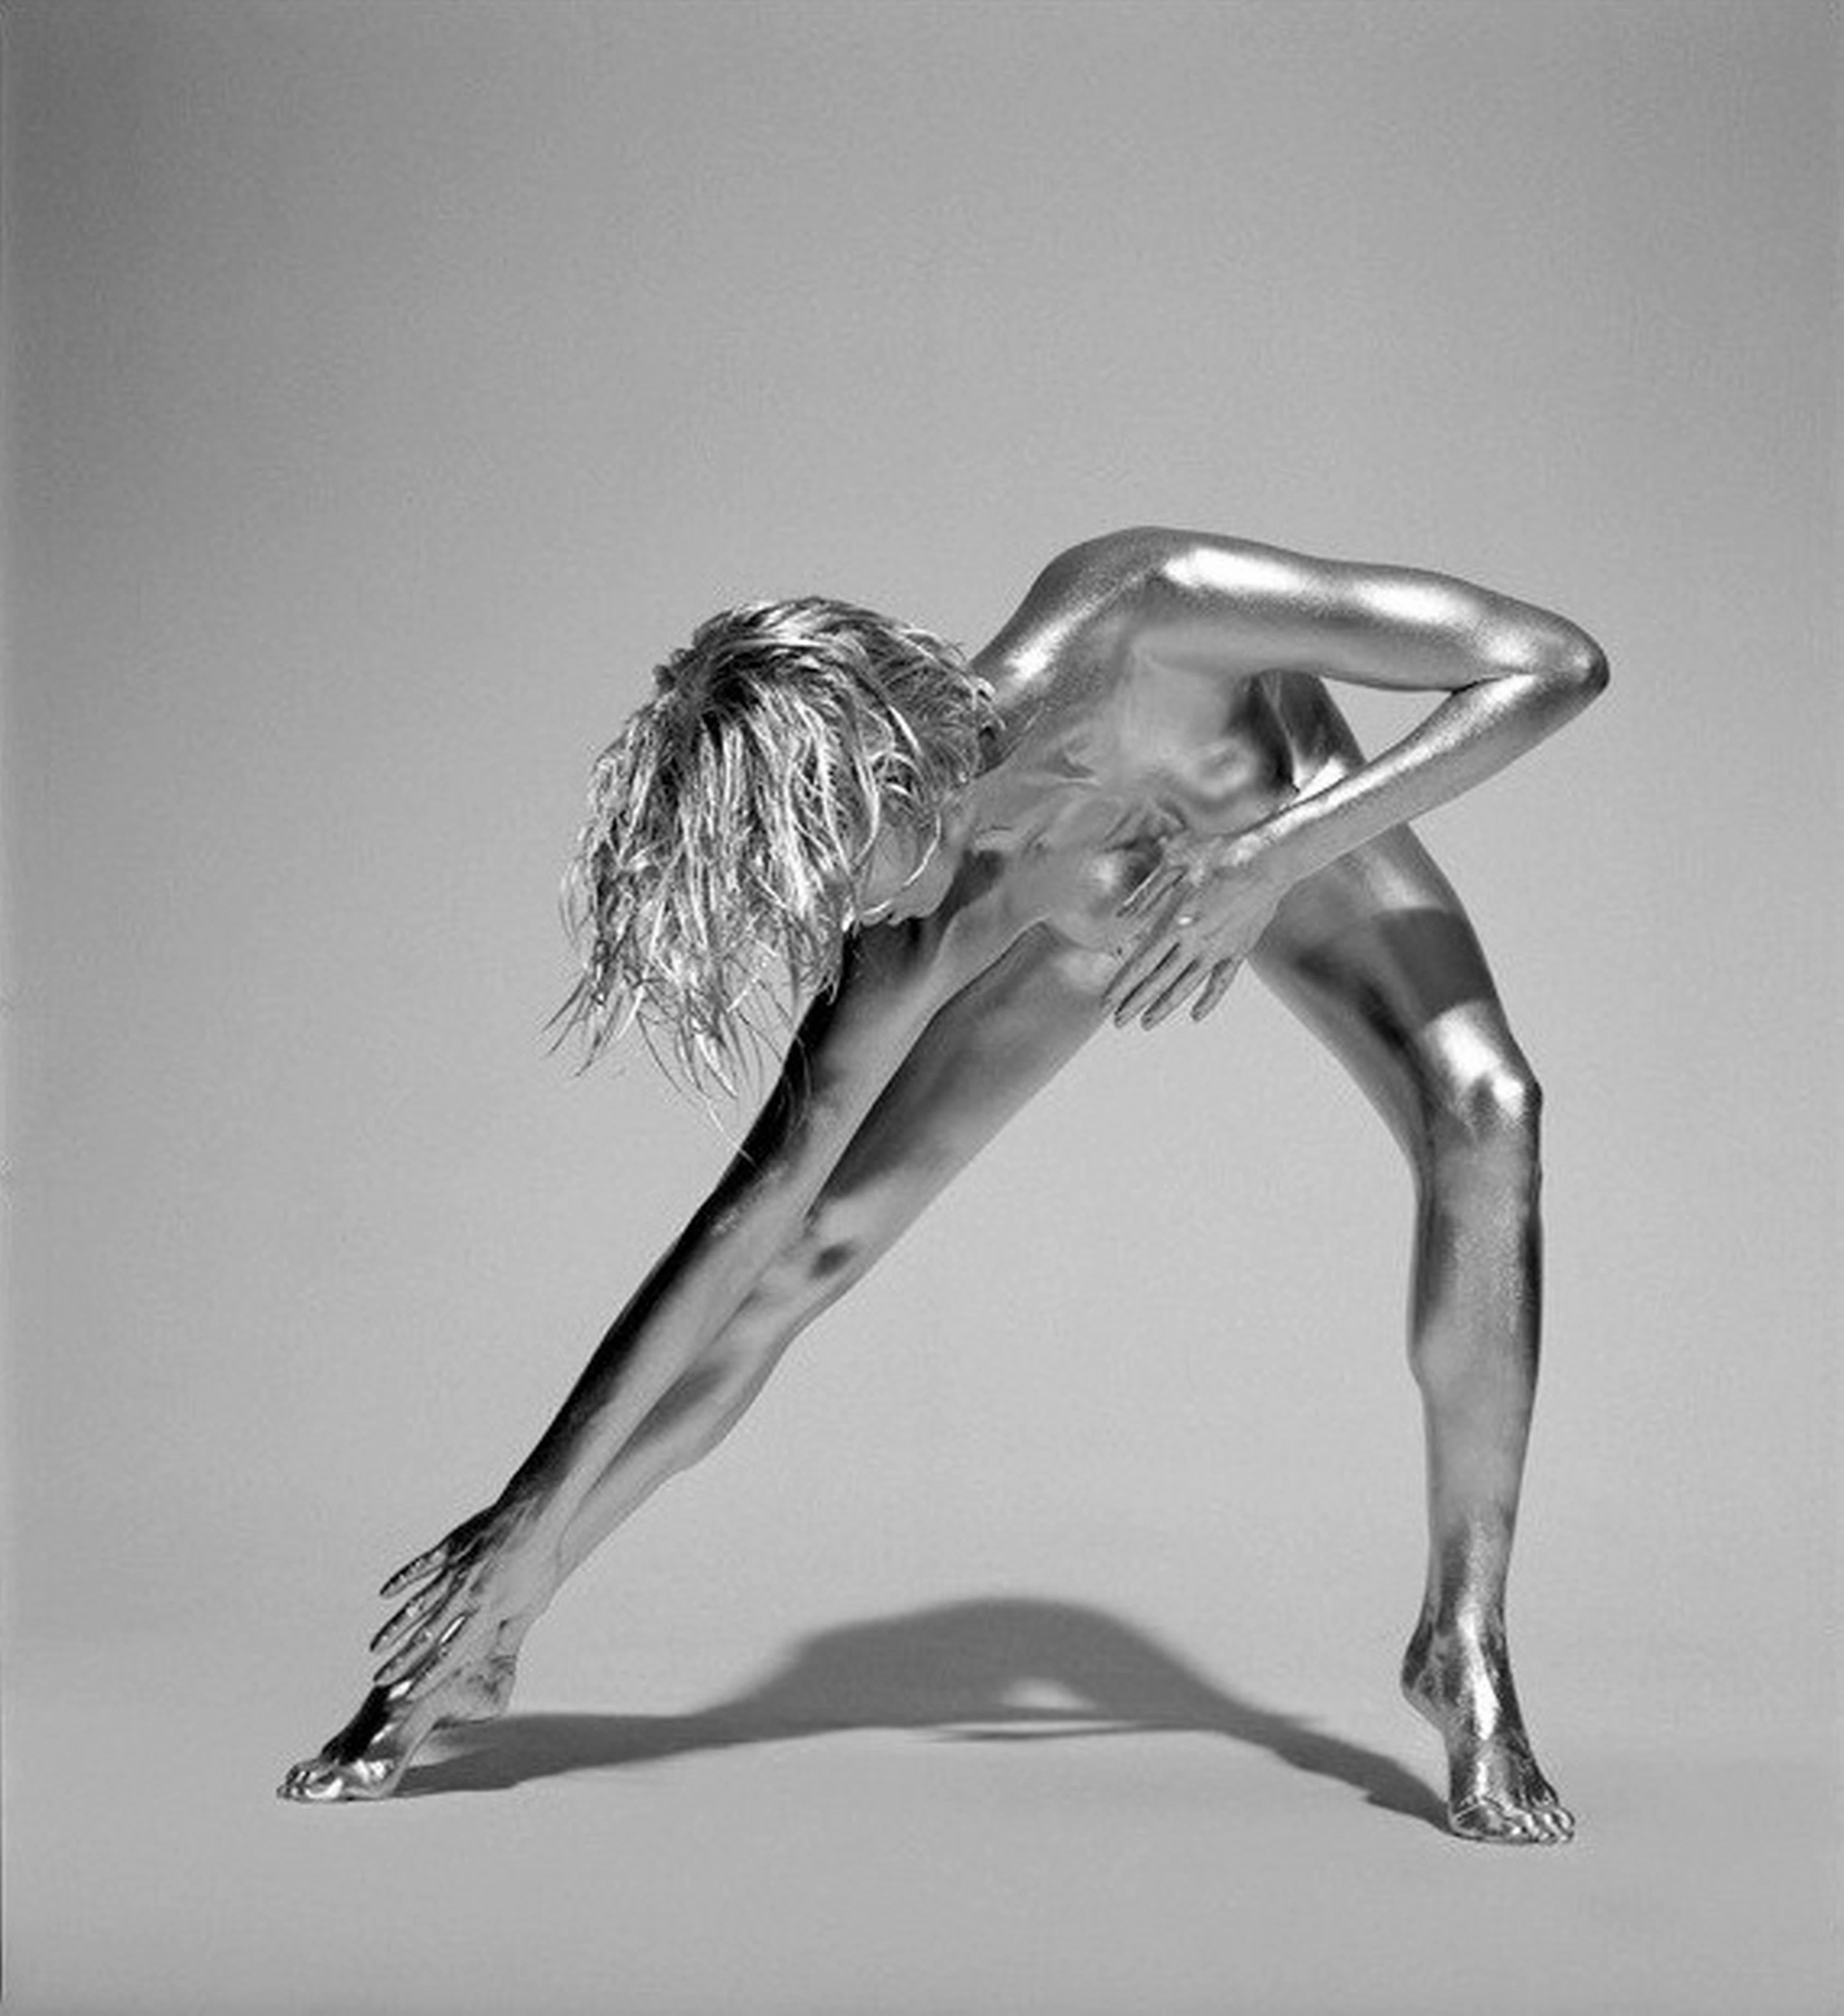 Amaterasu - naked model covered in silver paint - Photograph by Guido Argentini